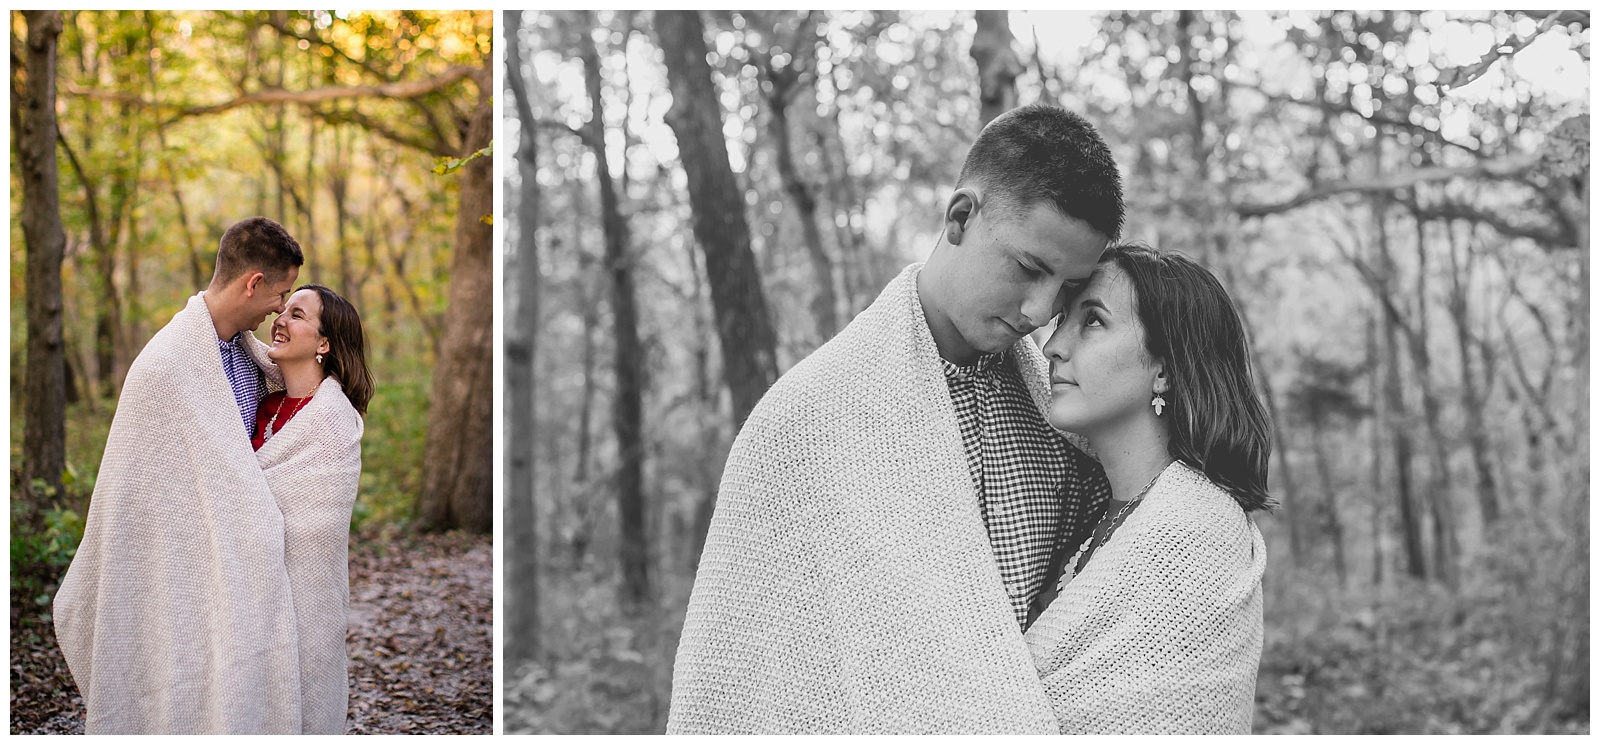 An engagement session at Burr Oak Woods in Blue Springs, Missouri.